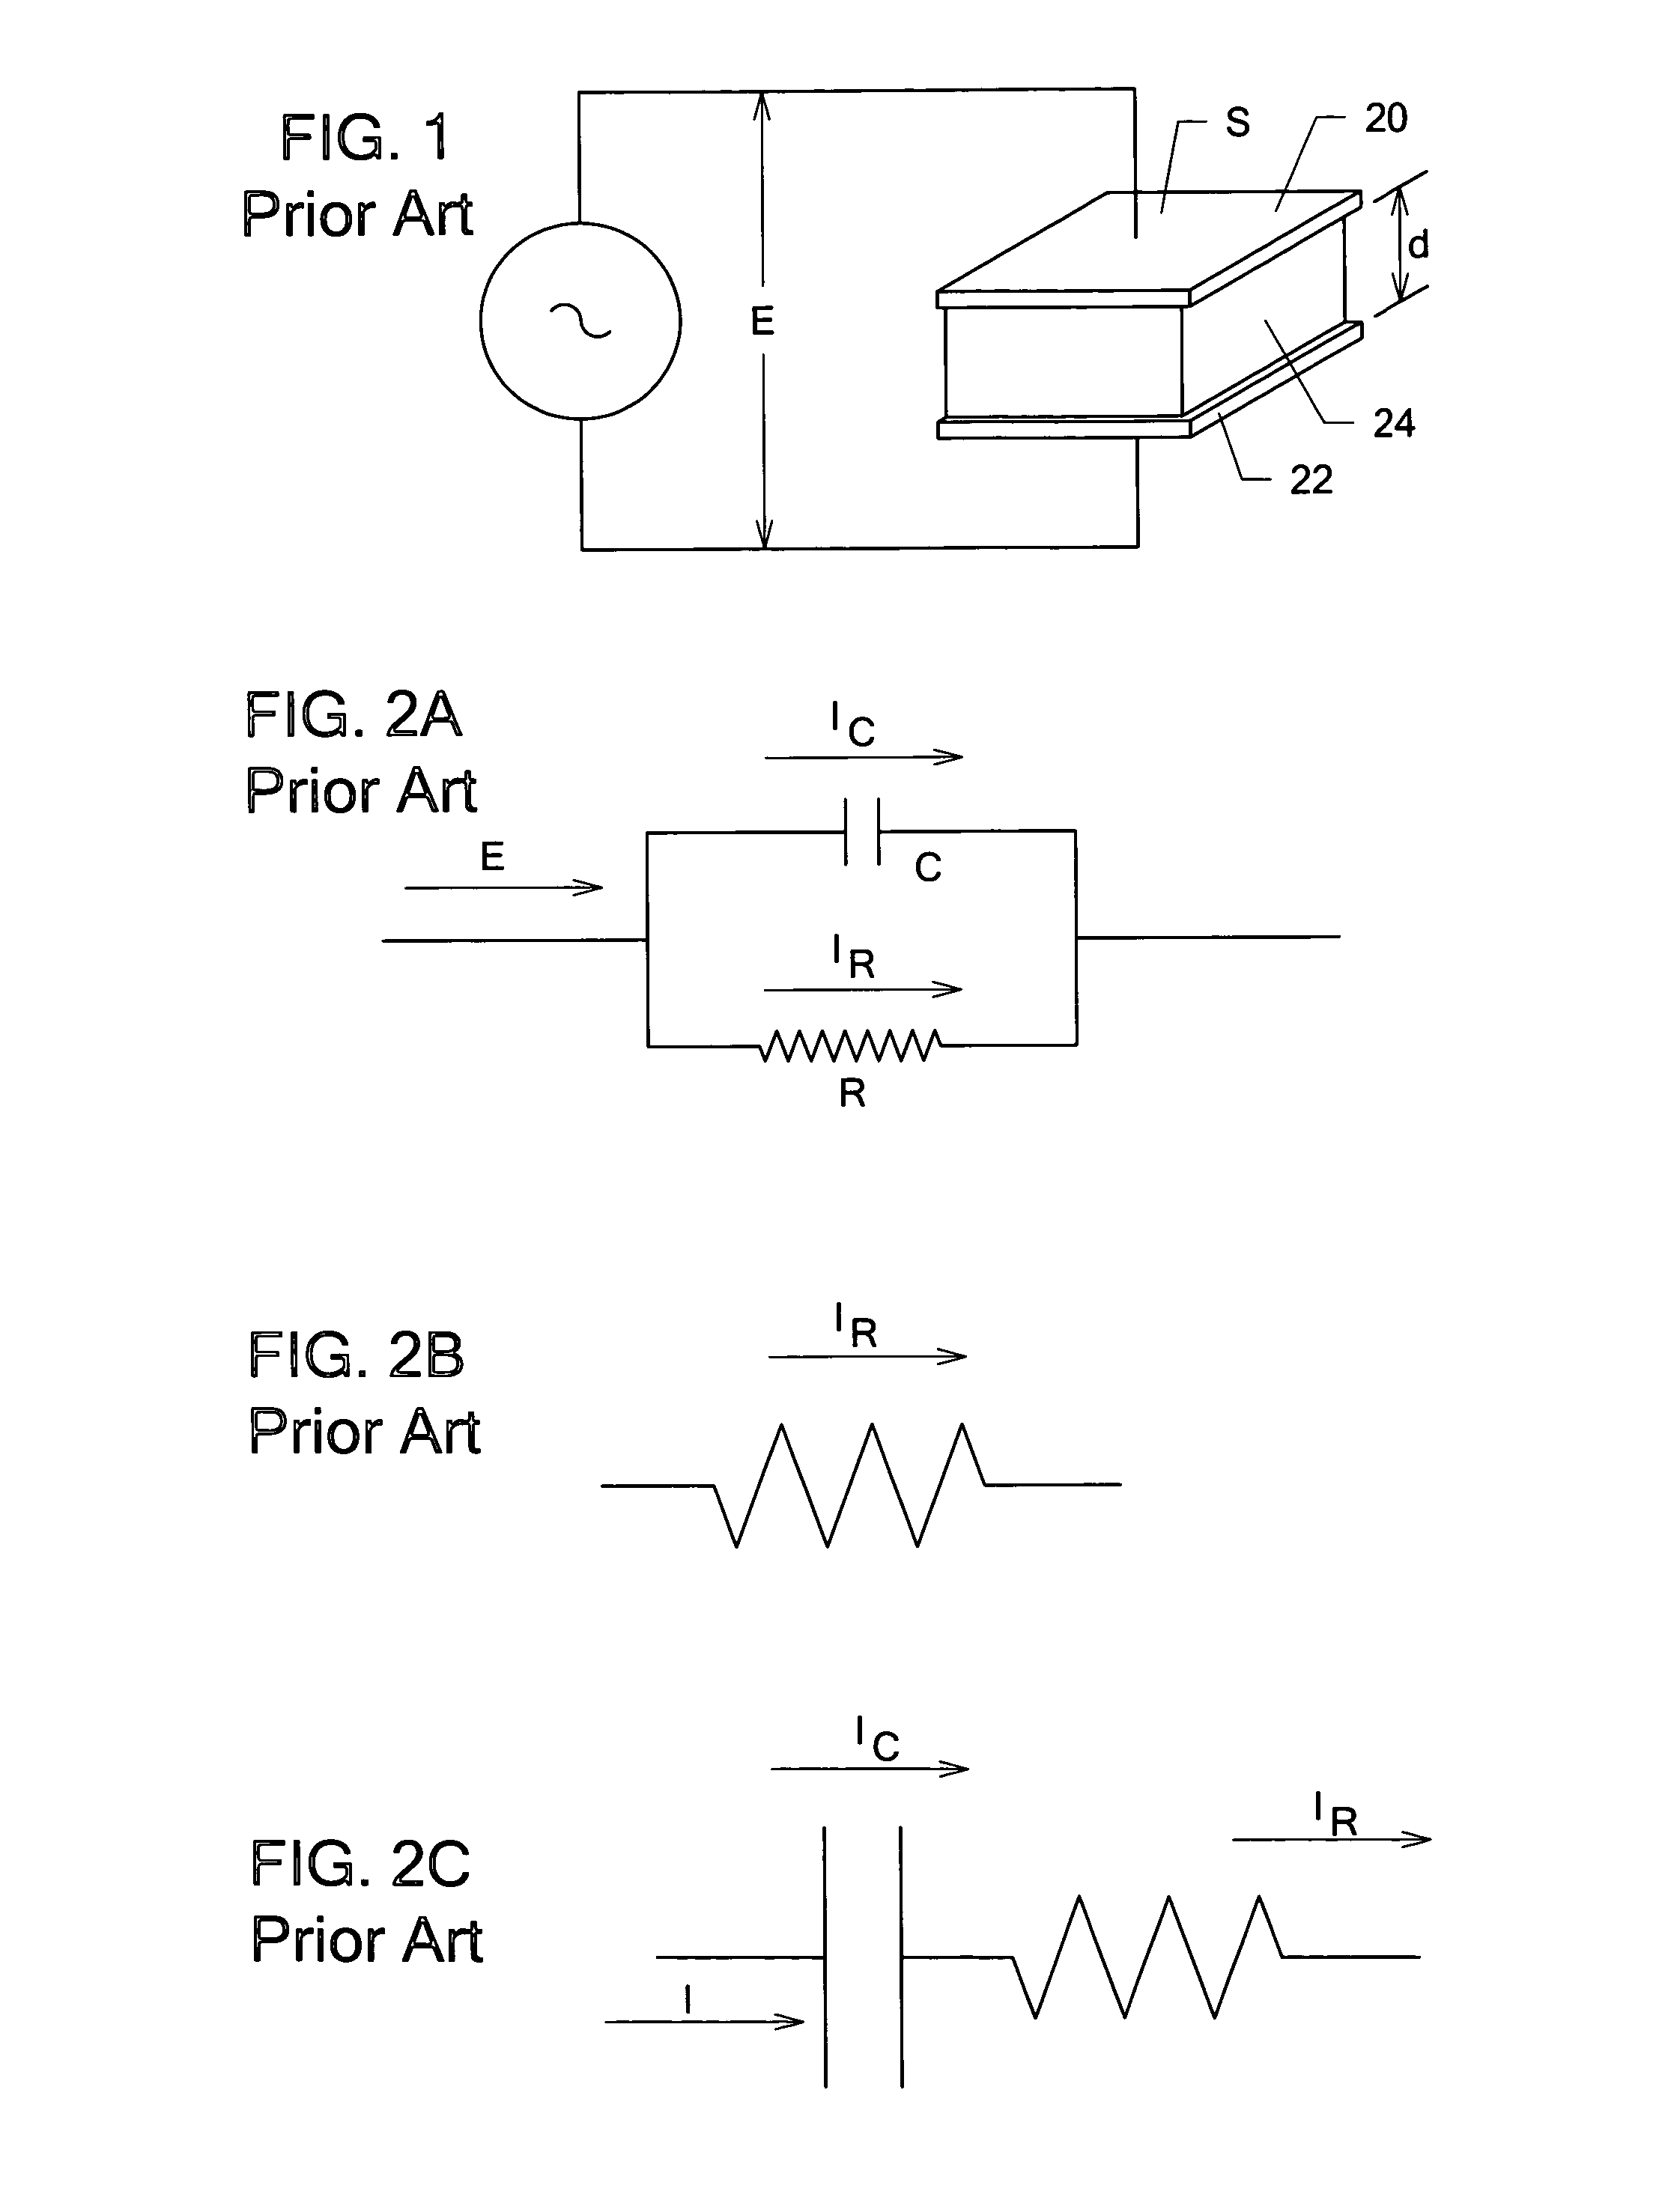 In situ processing of hydrocarbon-bearing formations with variable frequency dielectric heating